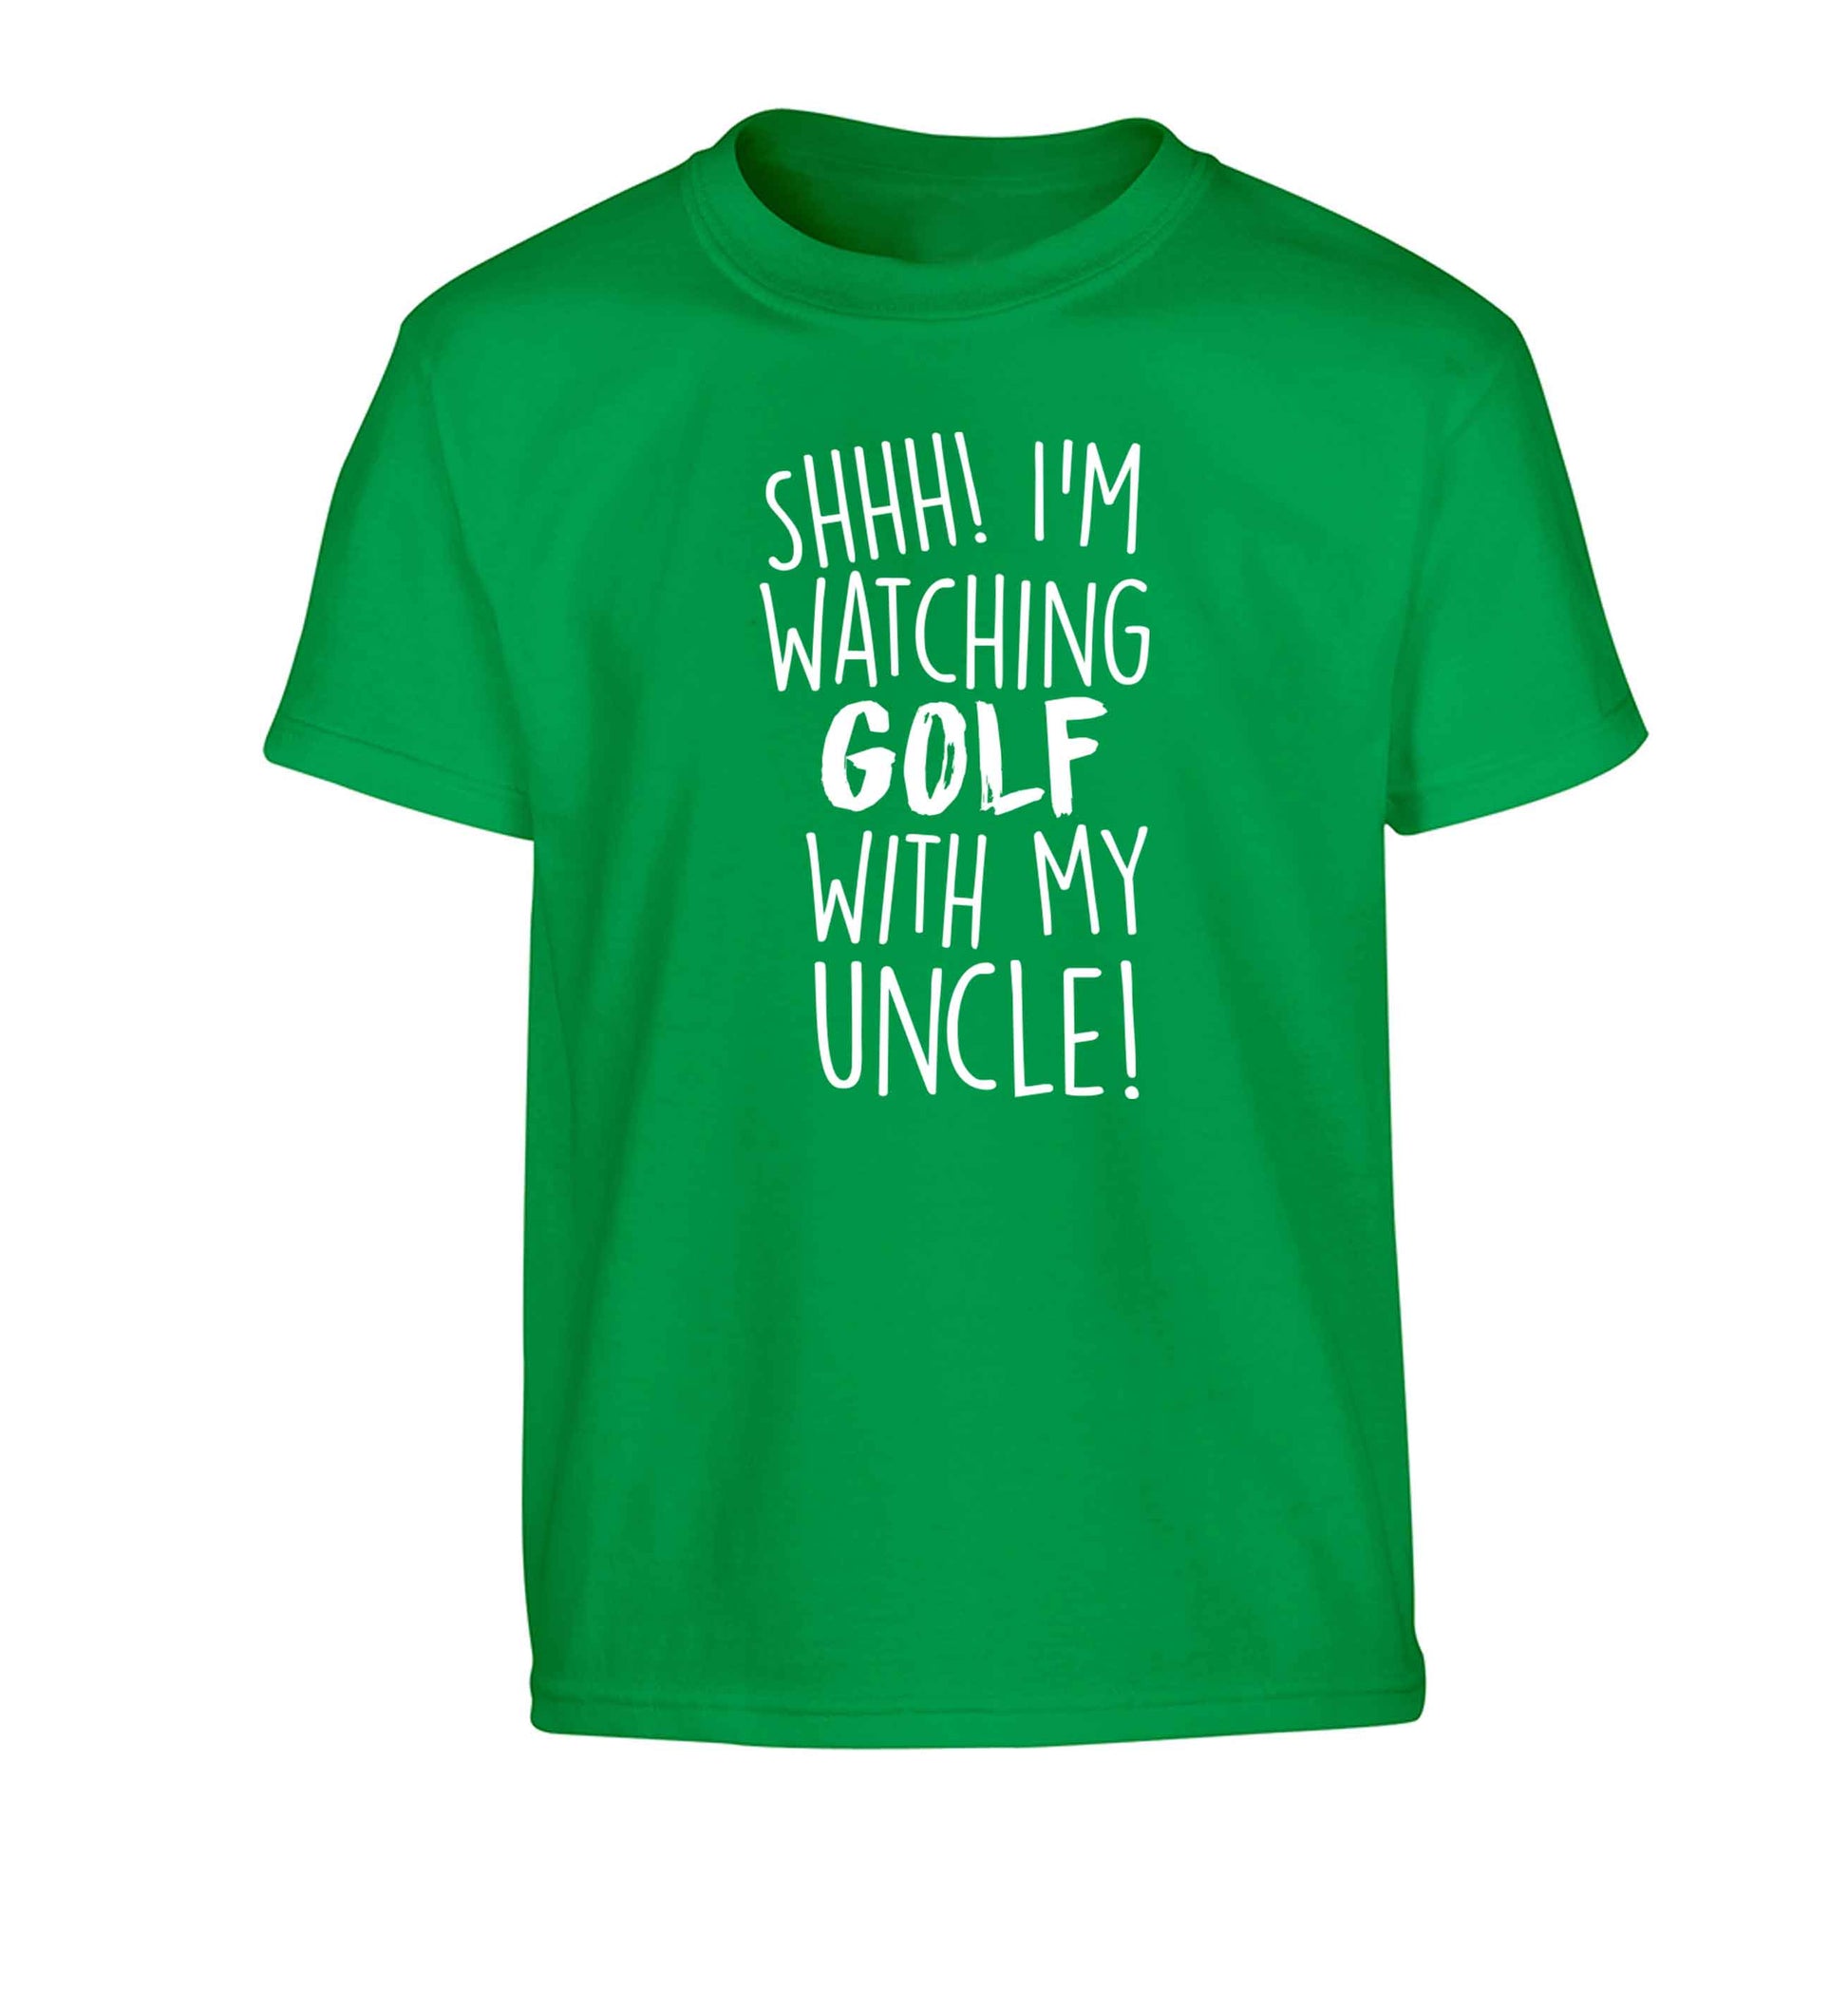 Shh I'm watching golf with my uncle Children's green Tshirt 12-13 Years